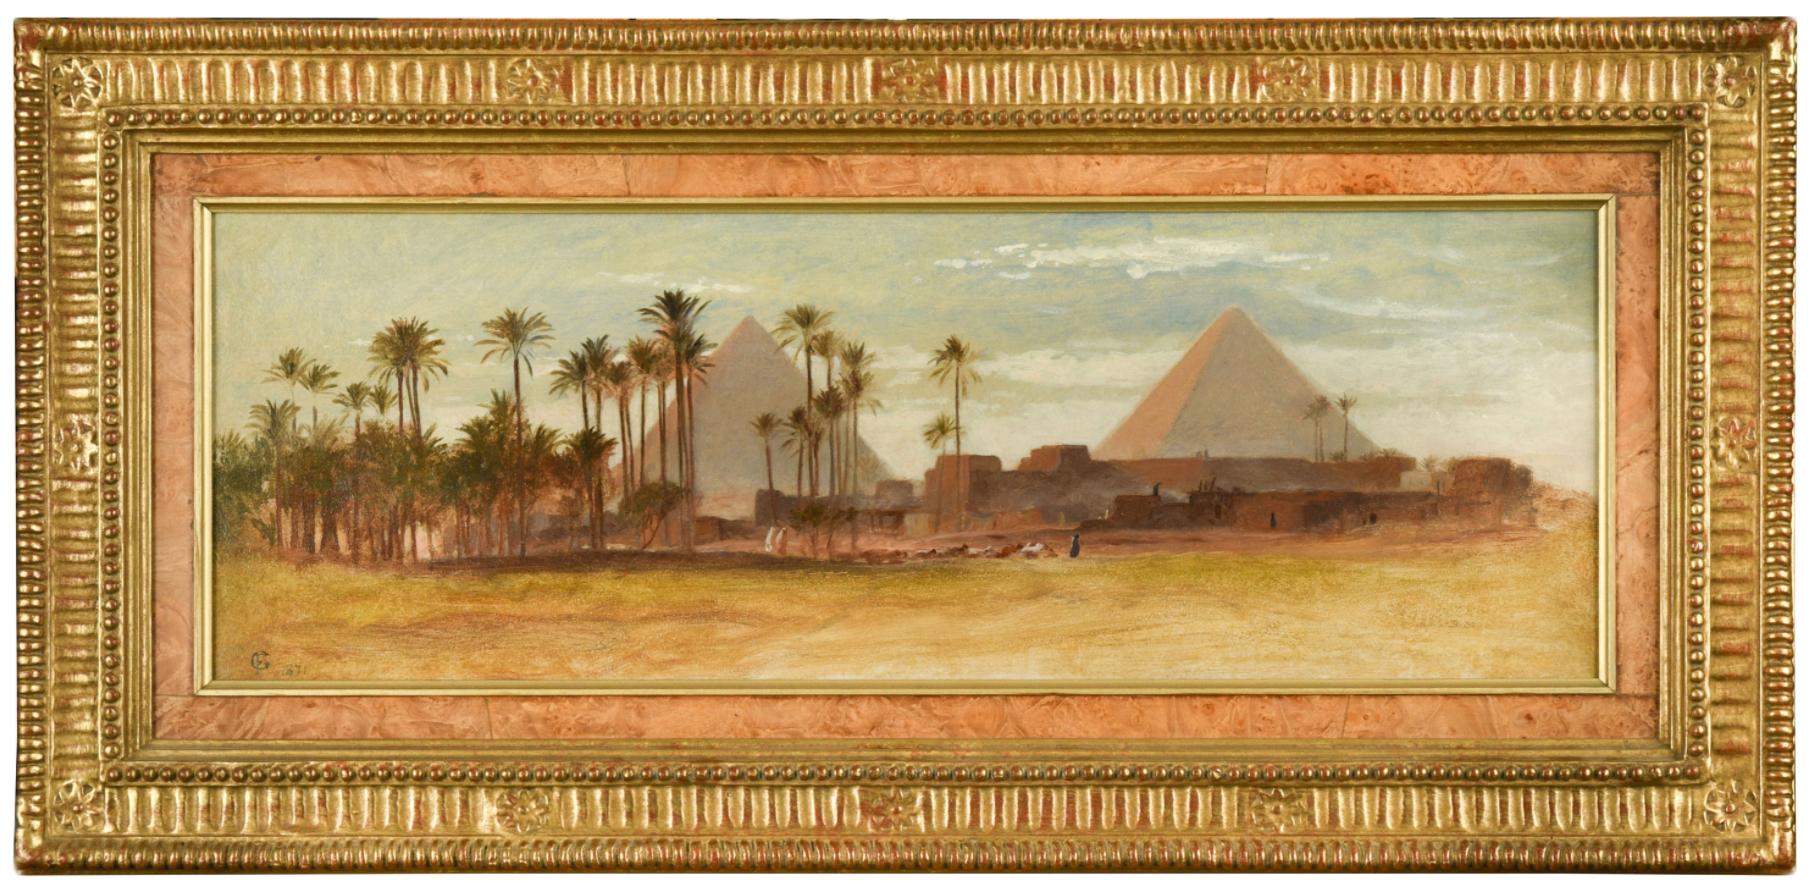 Frederick Goodall R.A. Landscape Painting - The Pyramids, Egypt